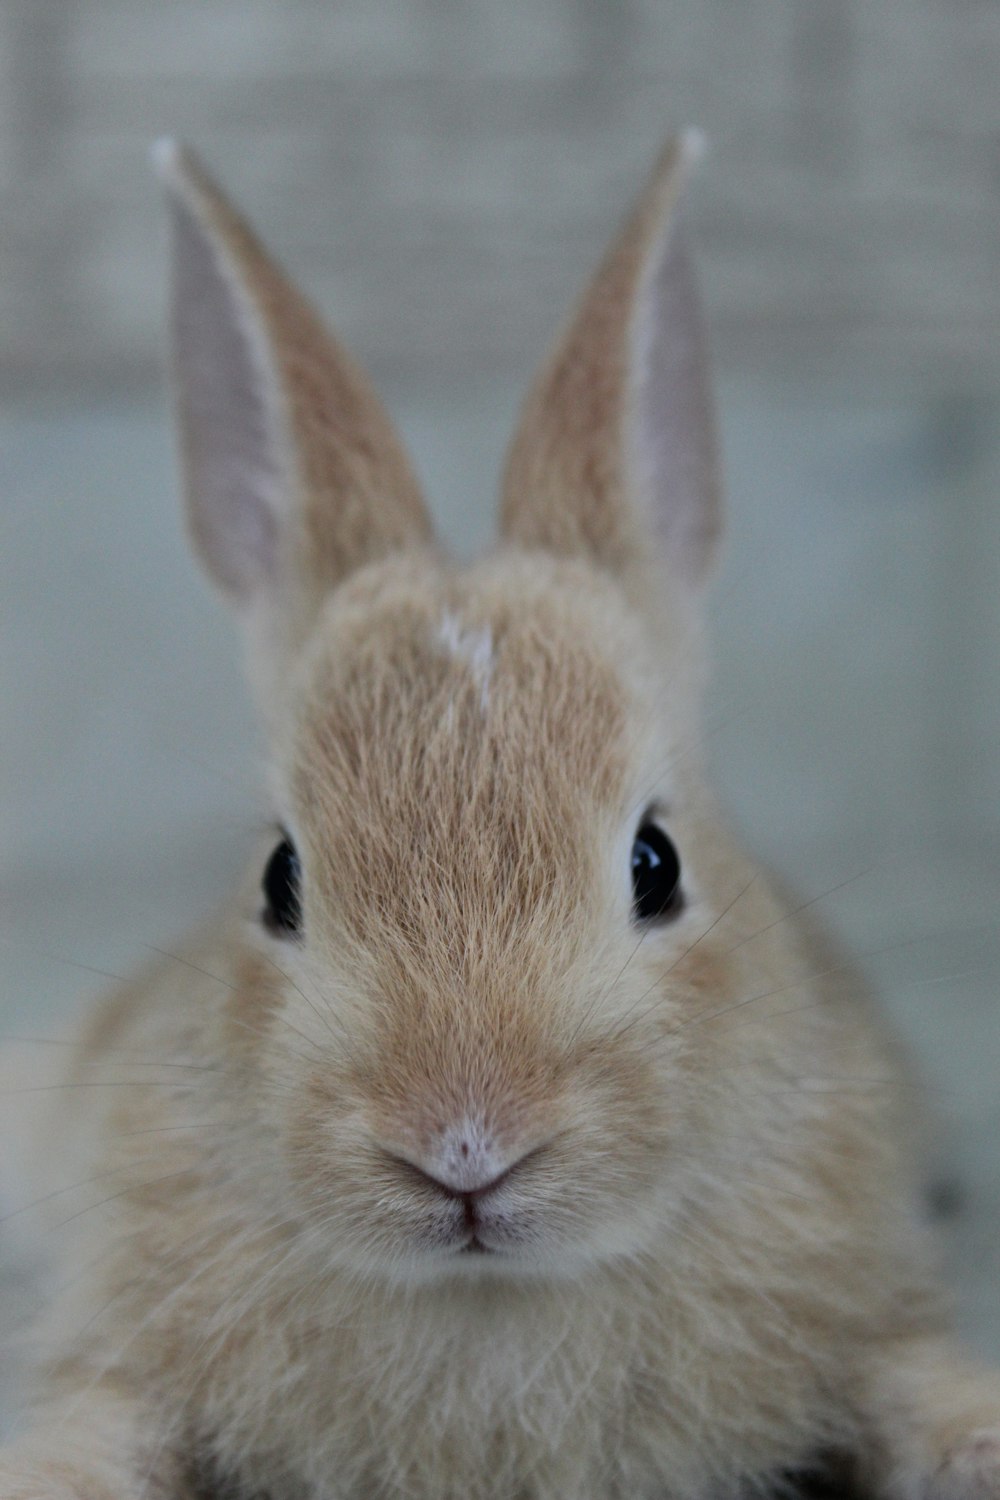 a close up of a small bunny rabbit